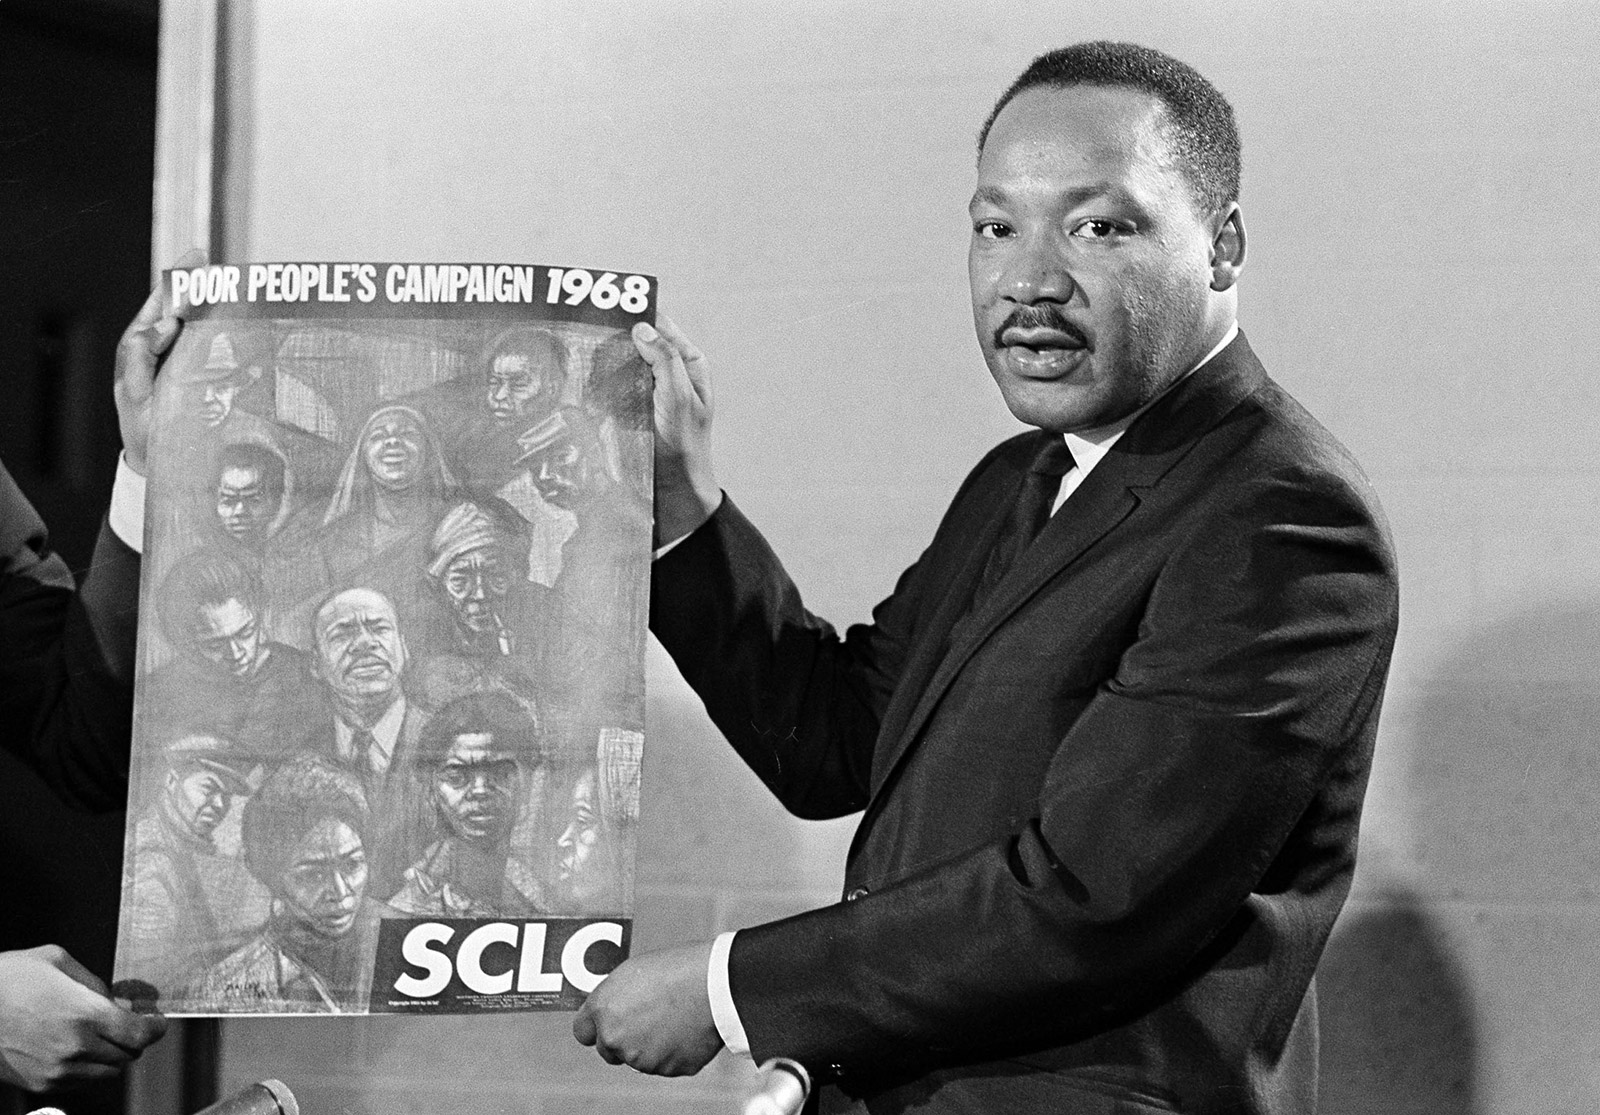 The life of Martin Luther King Jr. in pictures